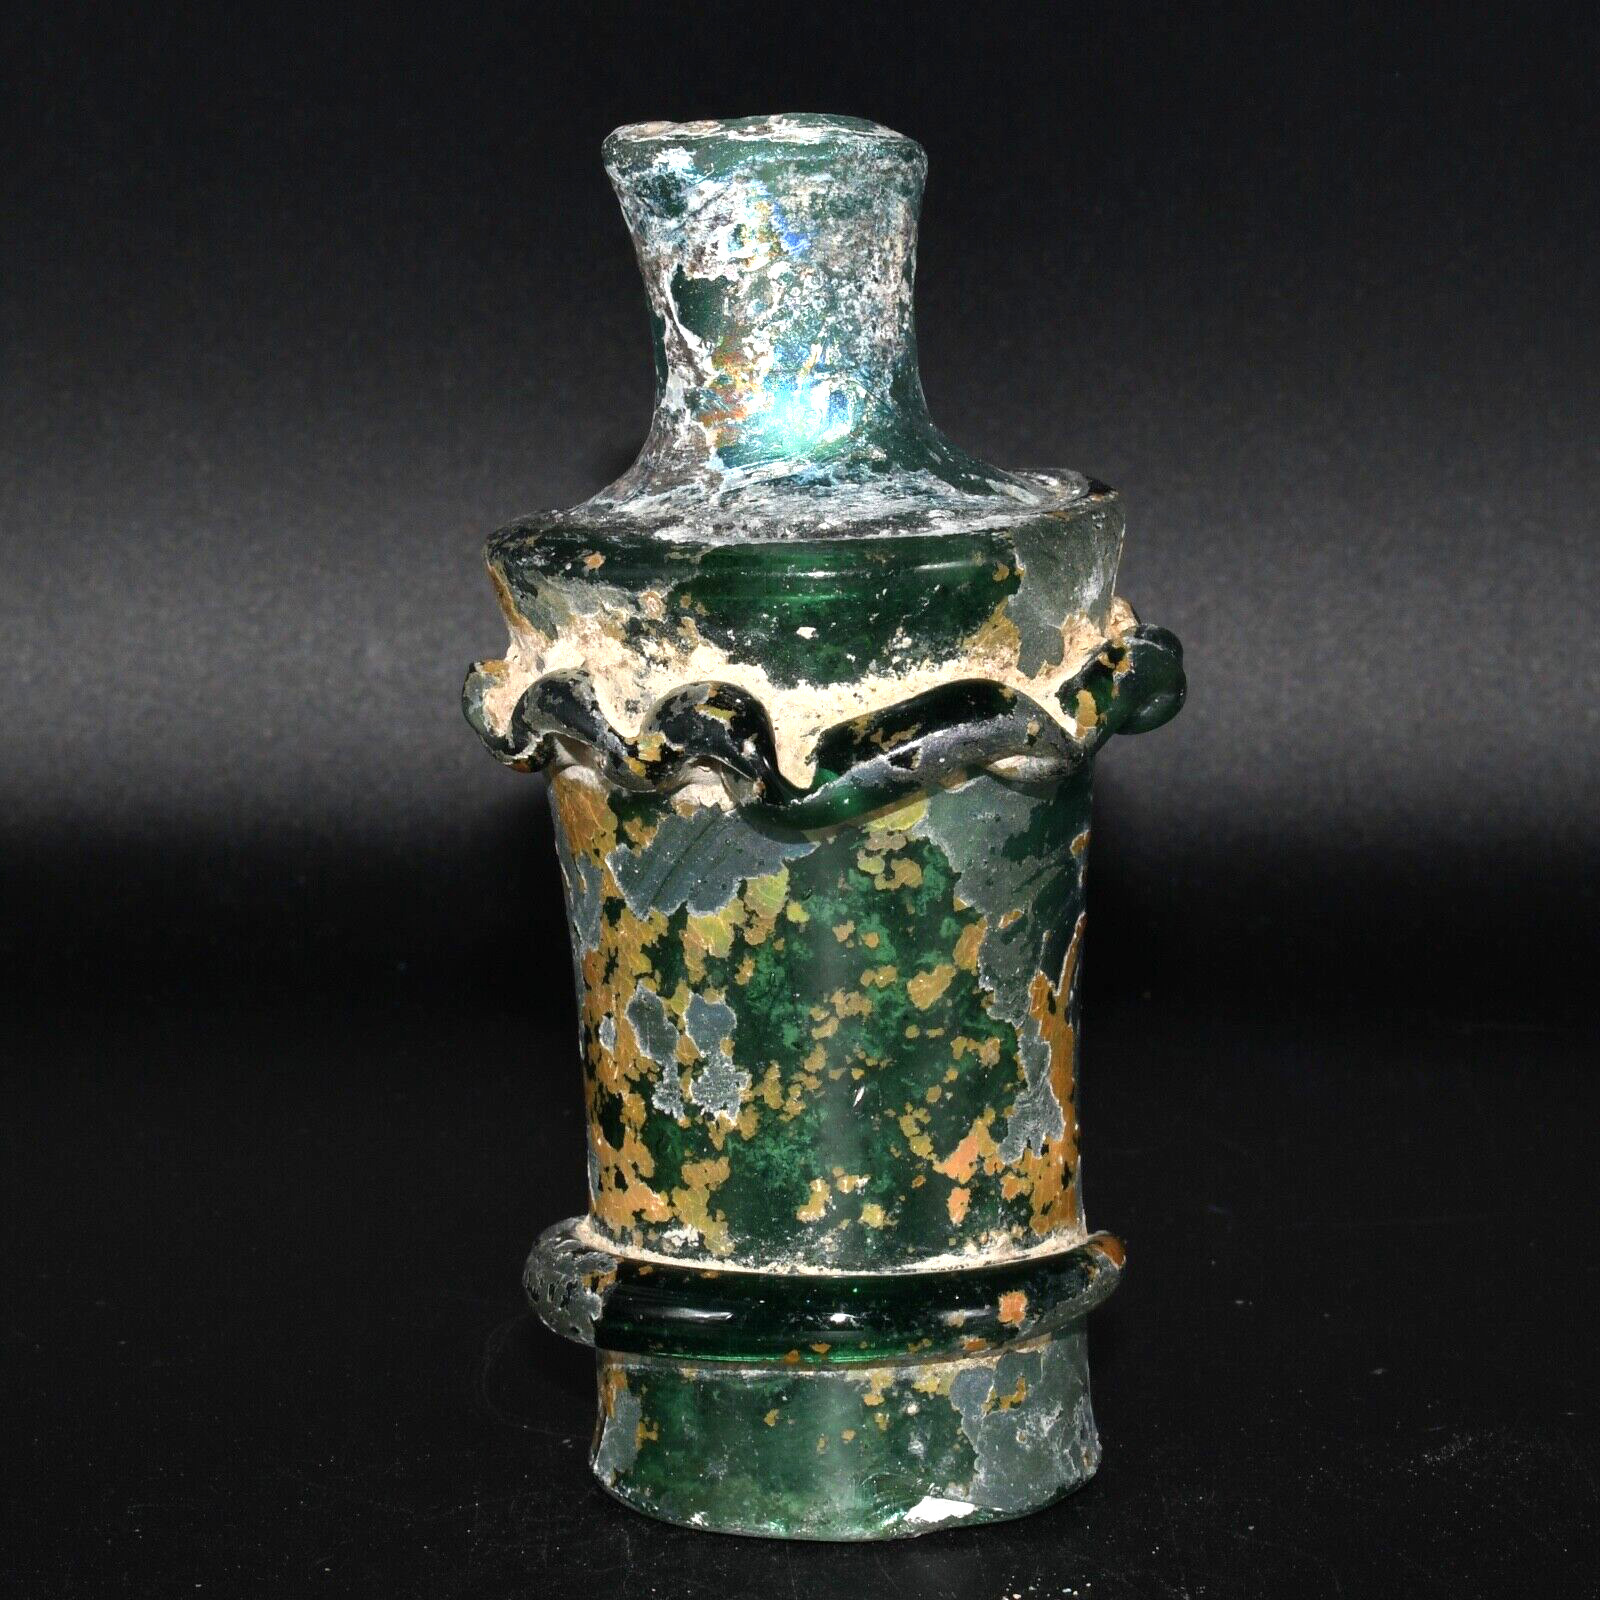 Genuine Ancient Roman Glass Bottle Container with Trailed Glass Decoration